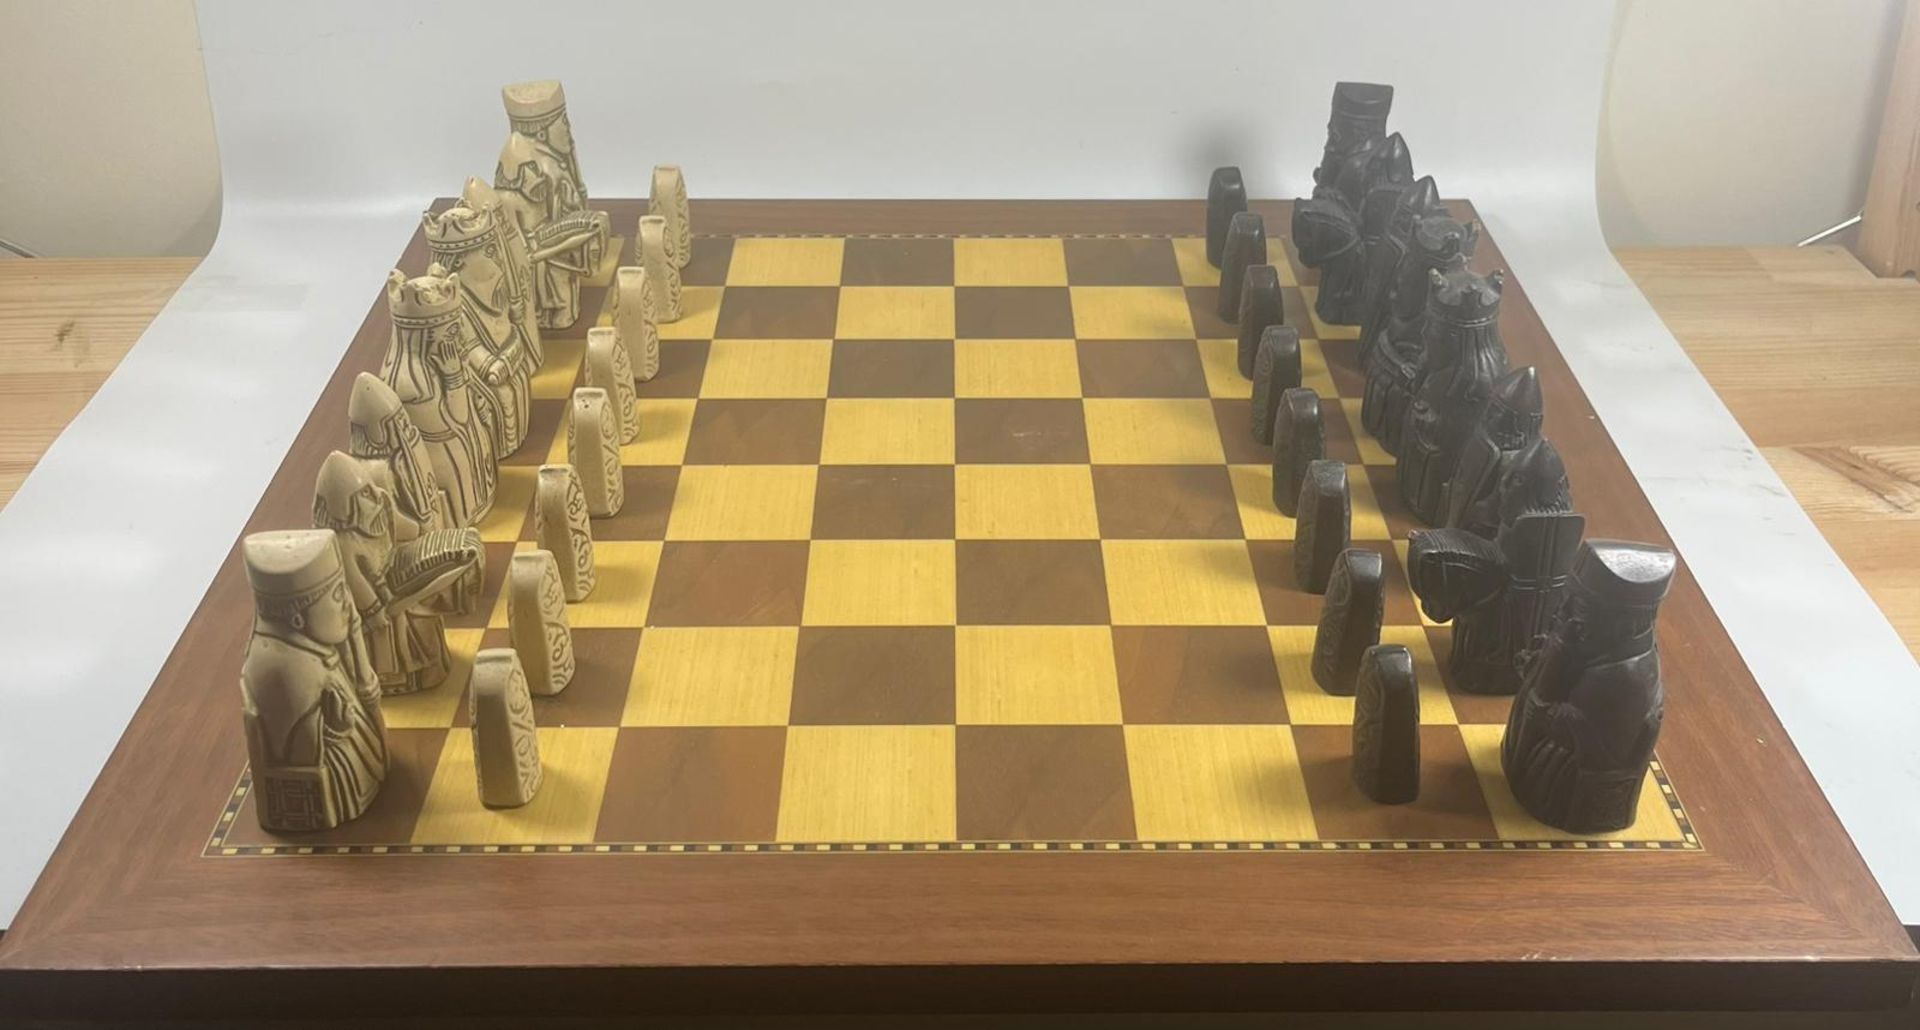 A VINTAGE LEWIS CHESSMEN CHESS SET MODELLED AS MEDIEVAL FIGURES ON AN INLAID WOODEN BOARD, KING - Image 2 of 5